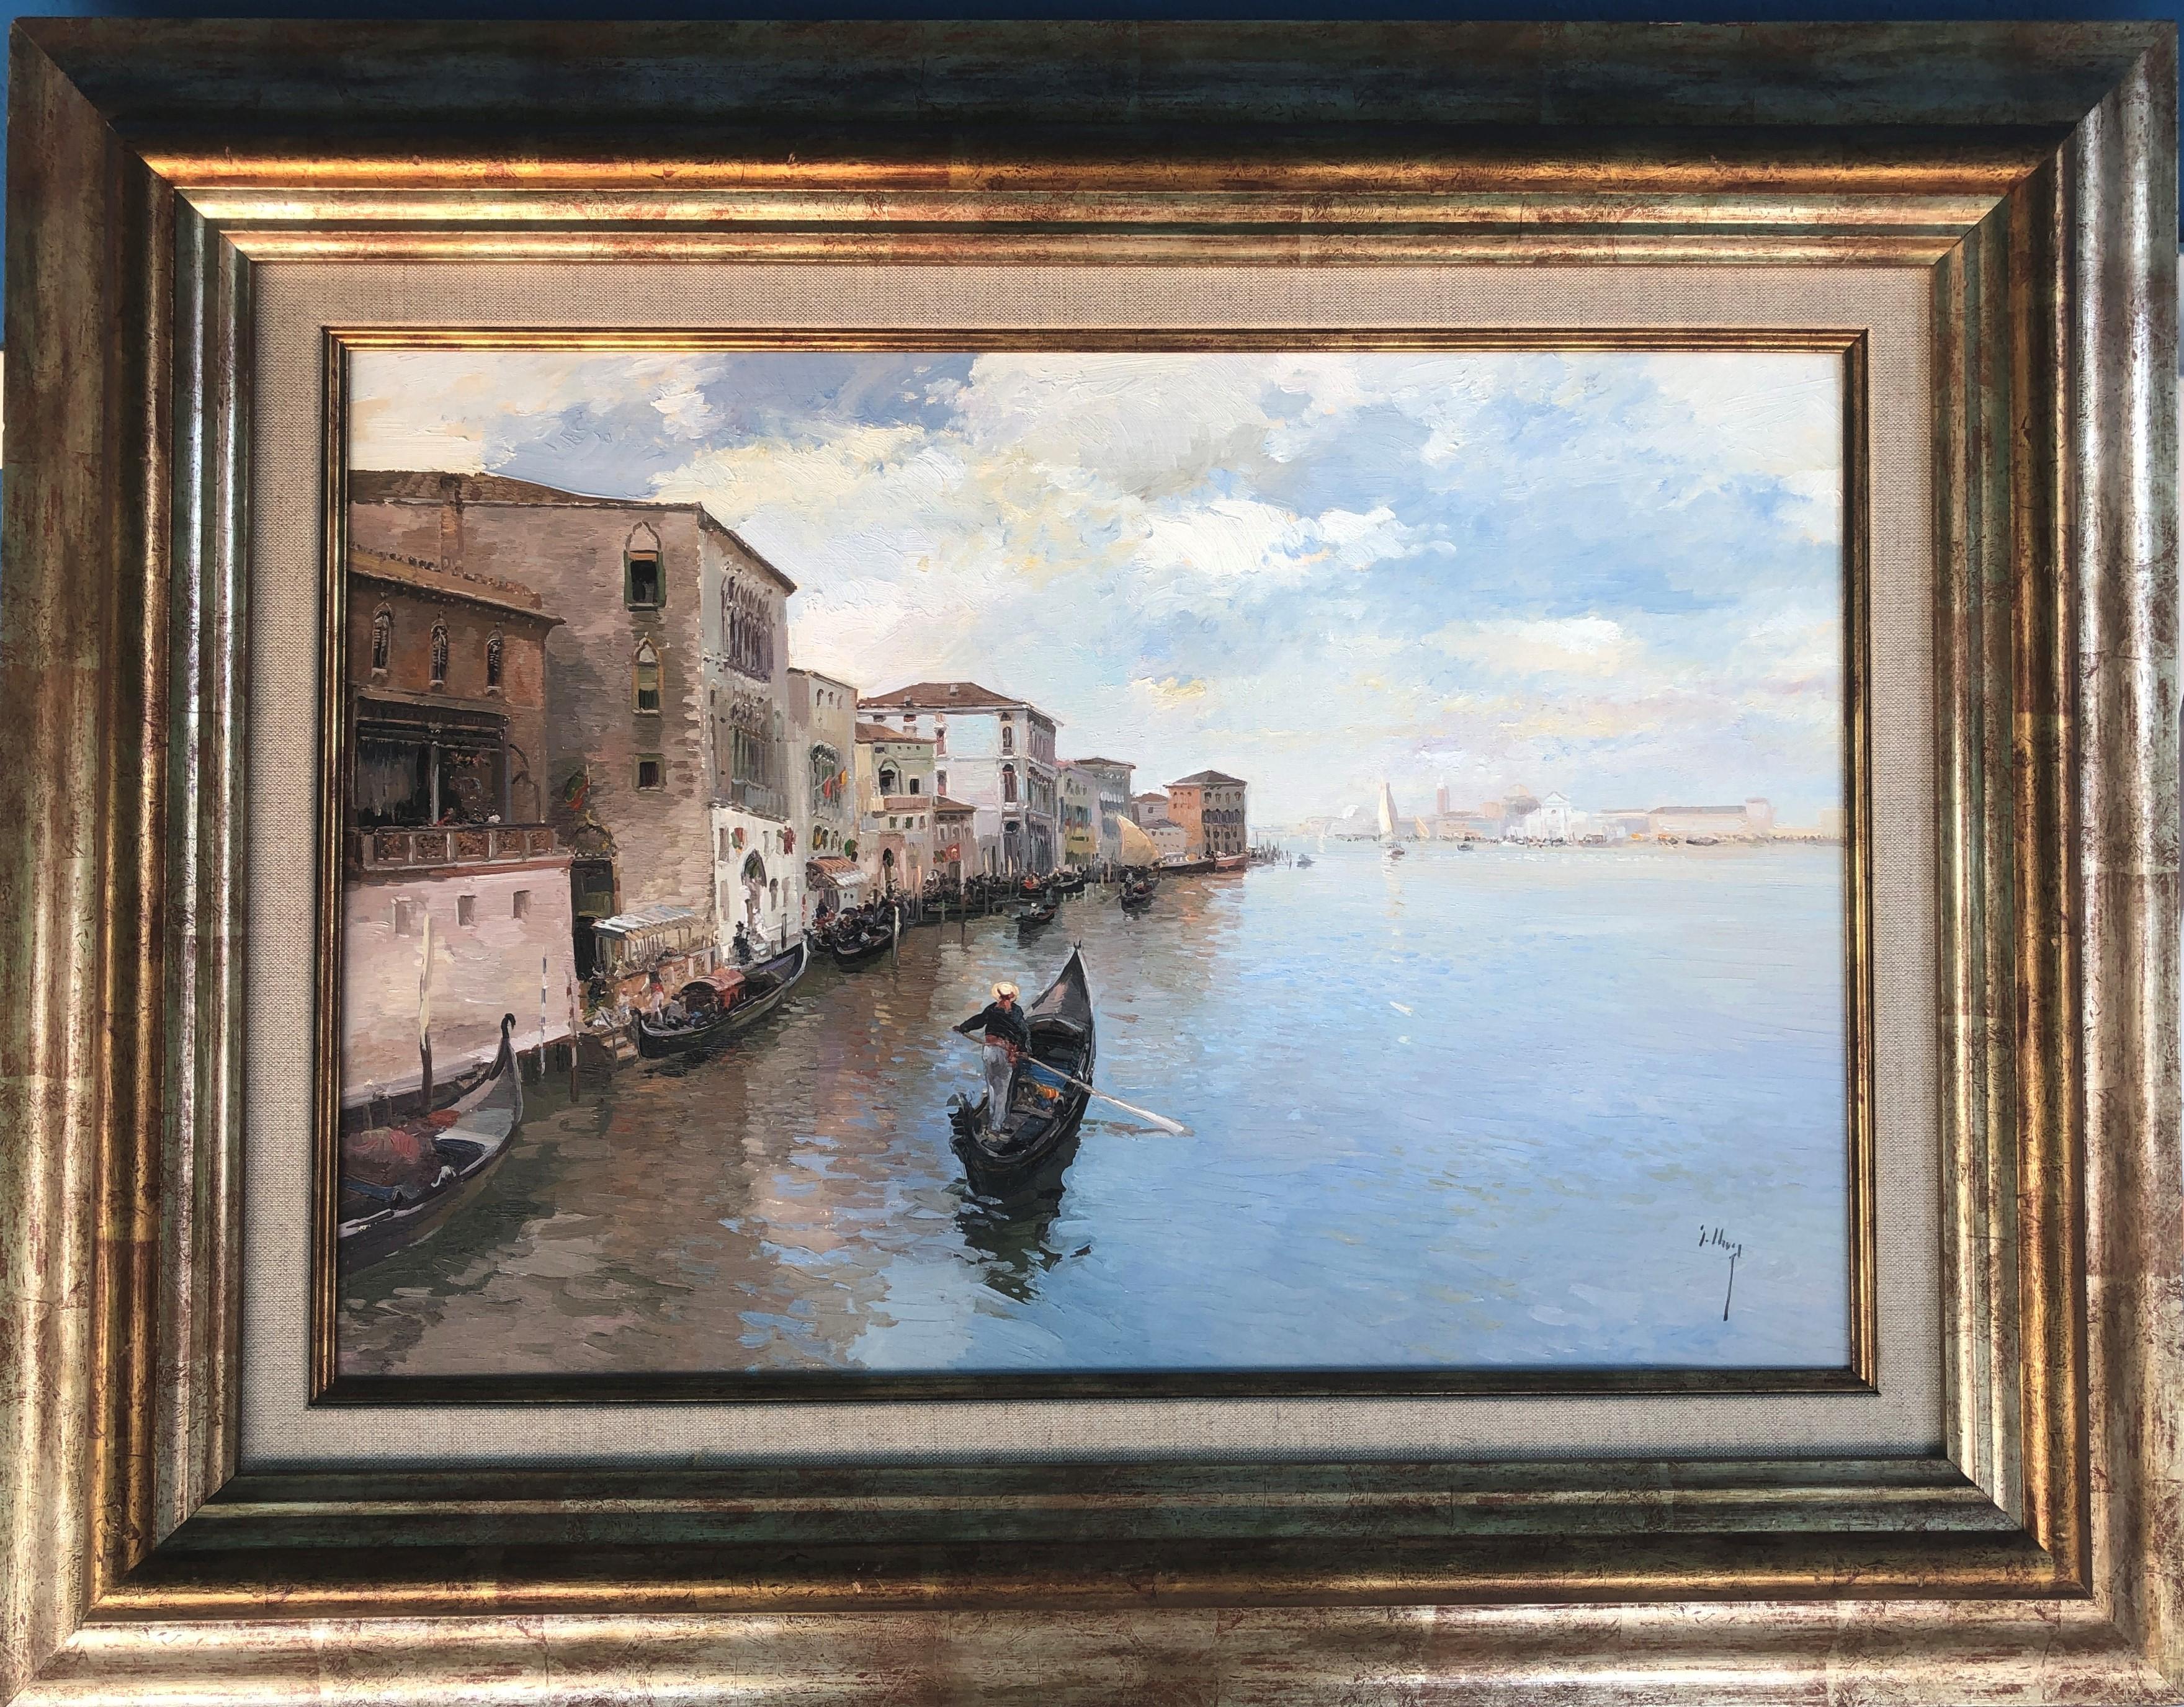 Venice Italy seascape original oil on canvas painting - Painting by José Luis Checa